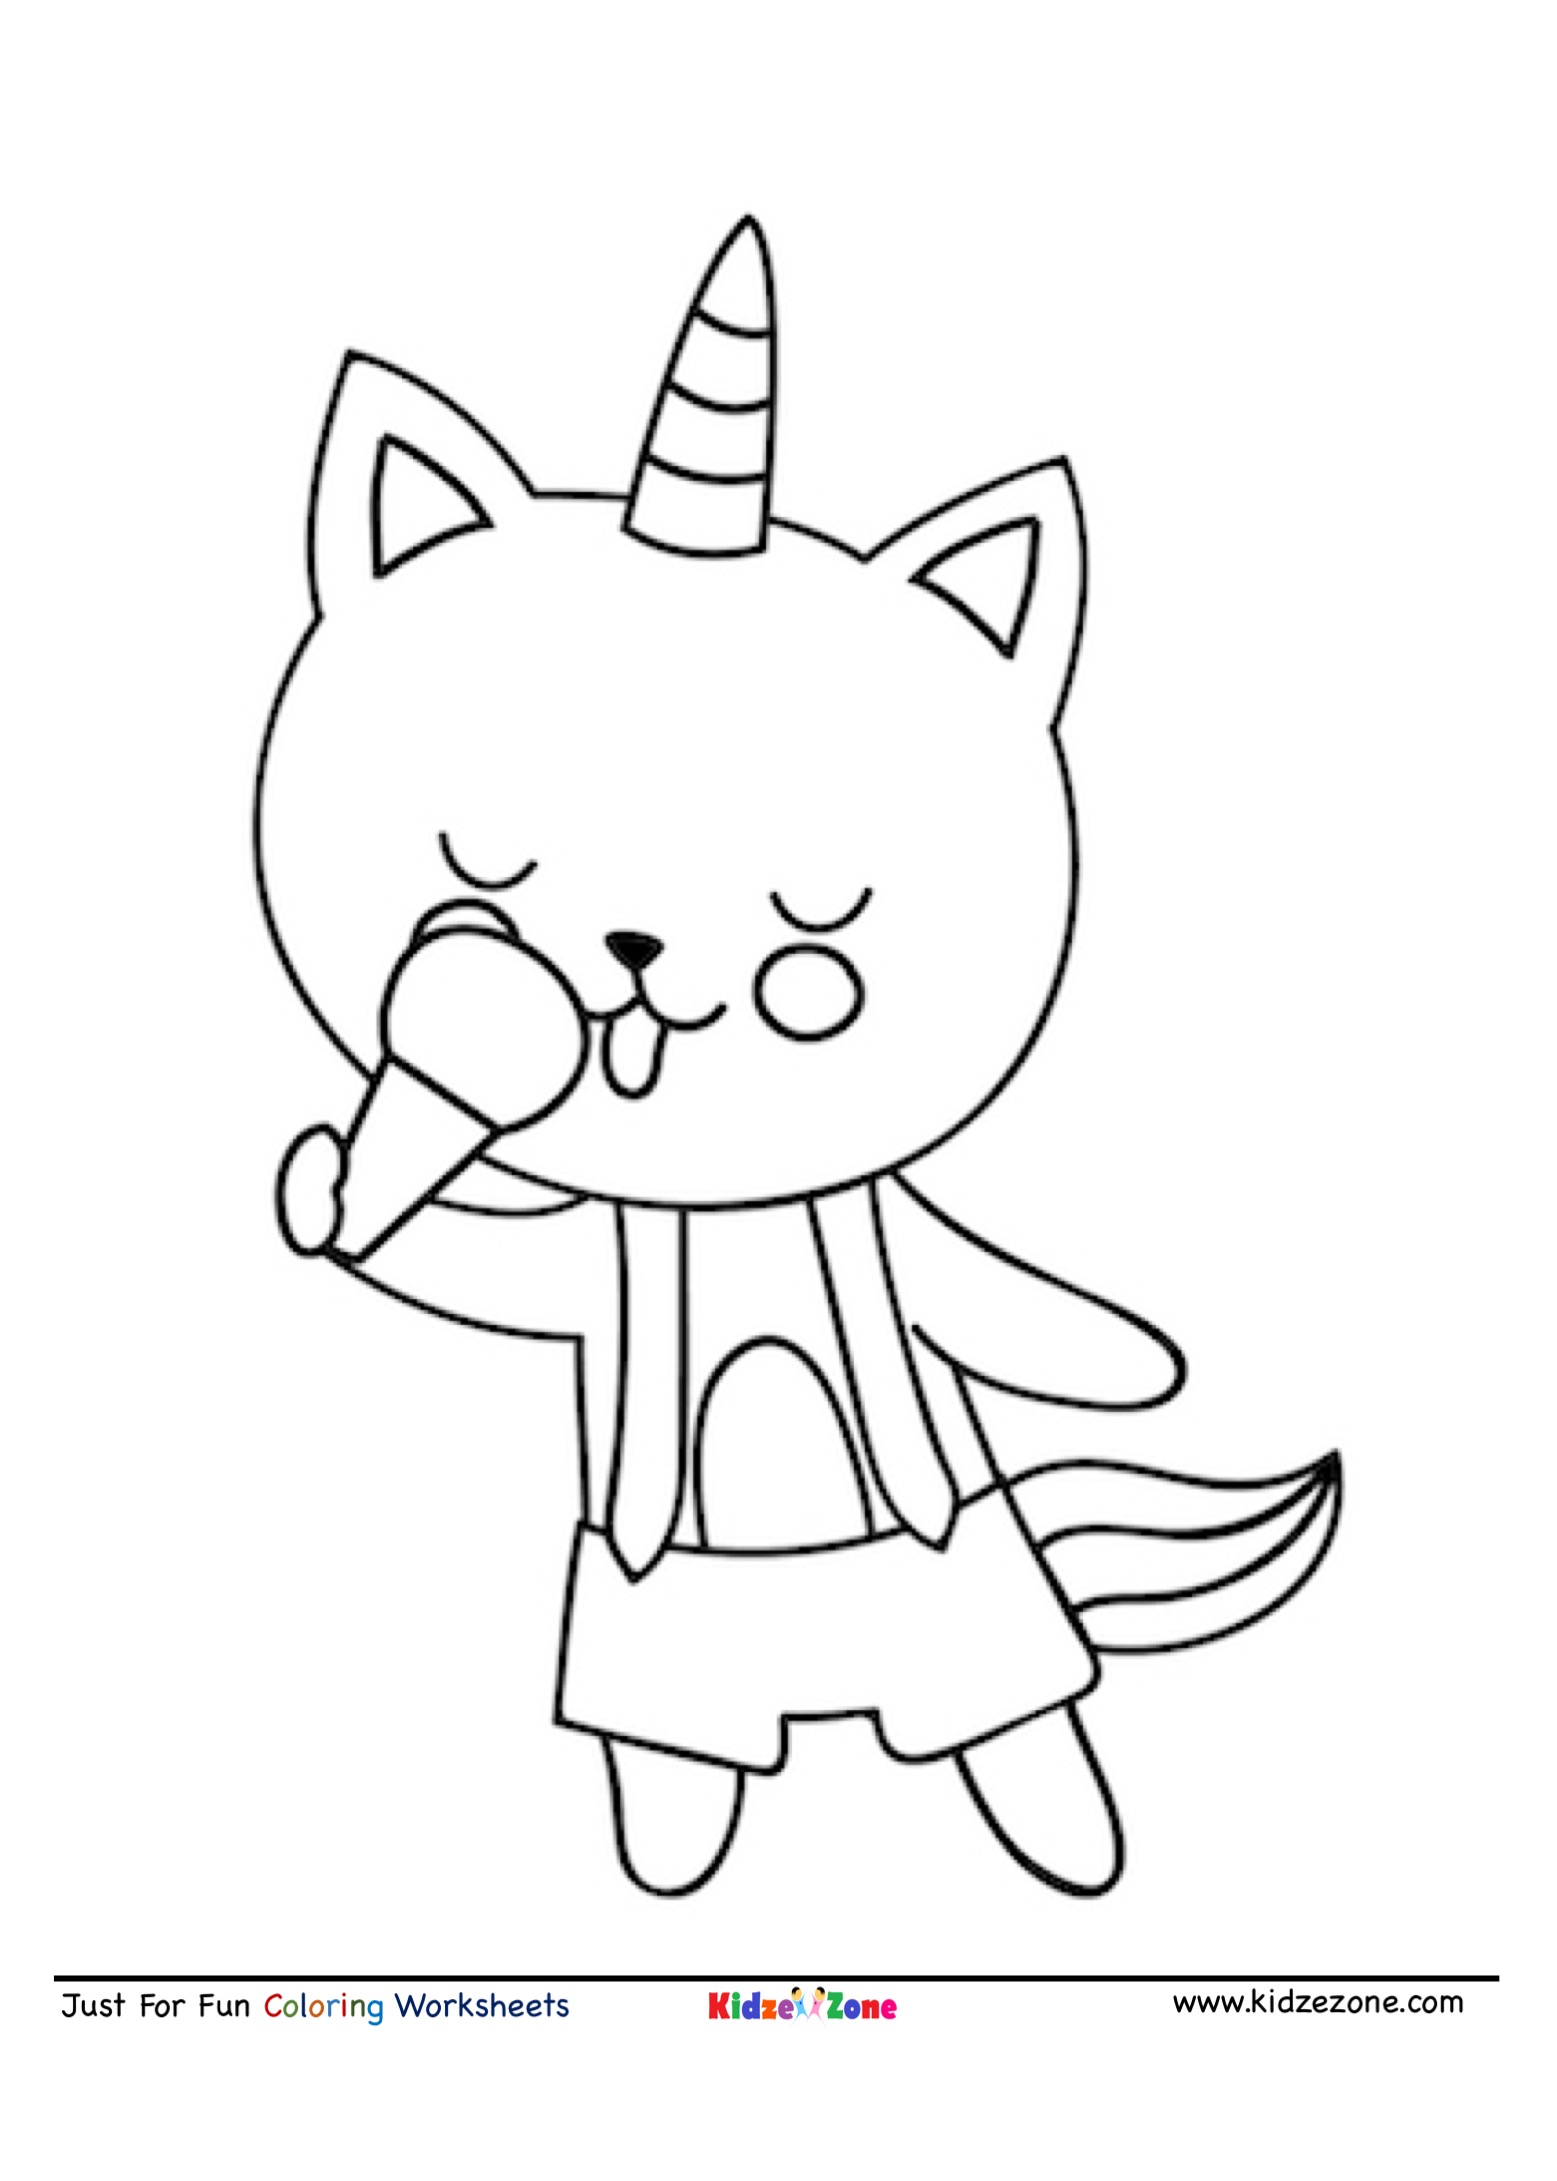 Cat Eating Ice Cream Coloring Page